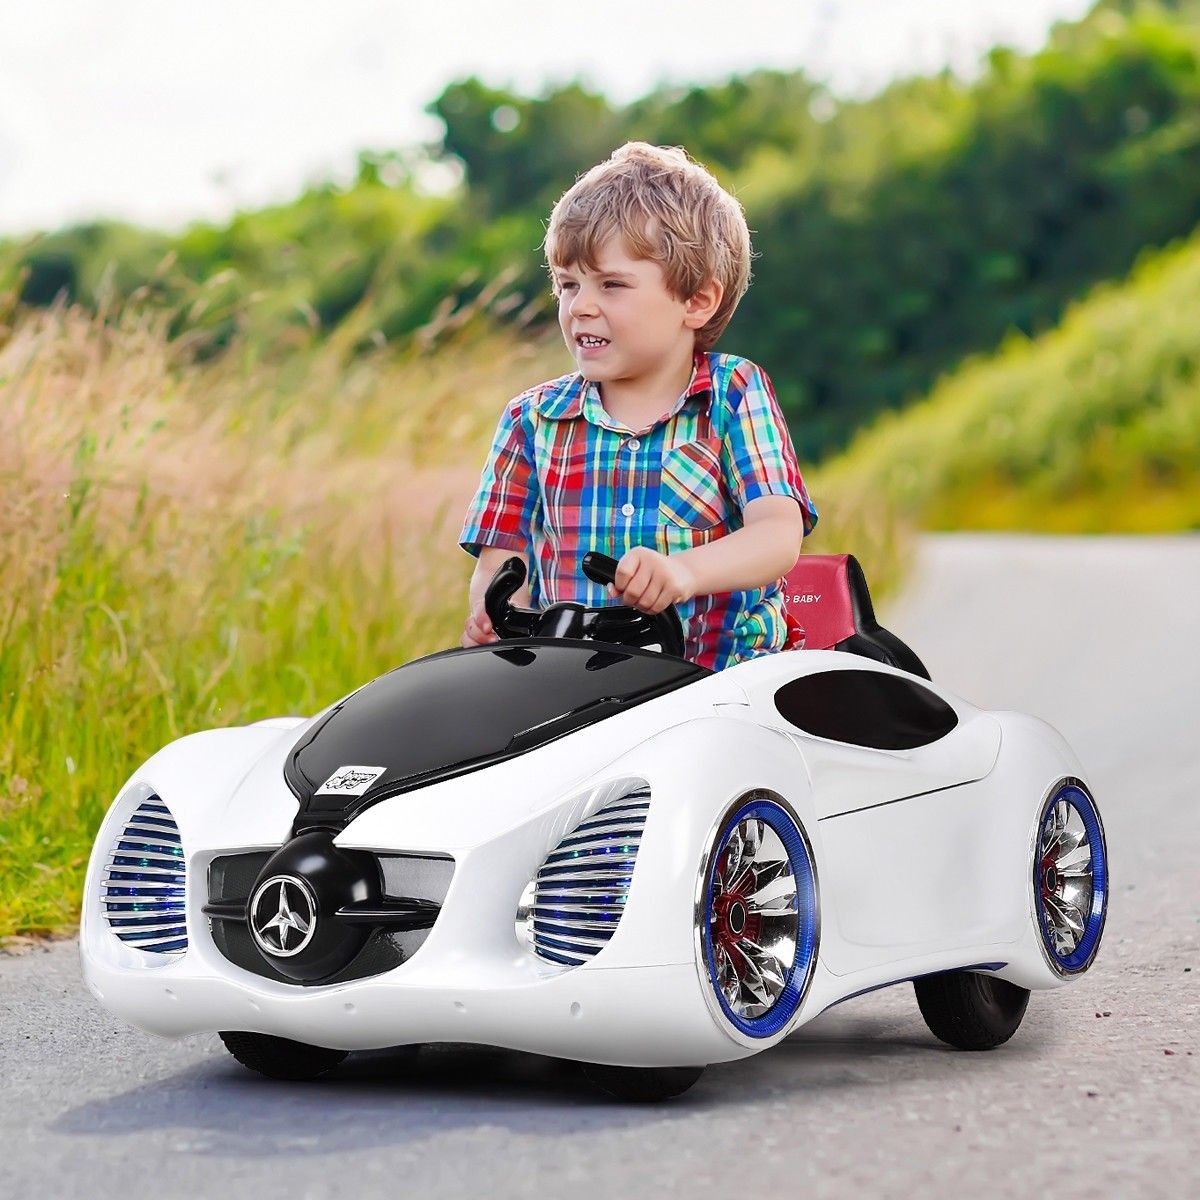 Outdoor Adventures: Exploring Nature with Children's Cars for Driving